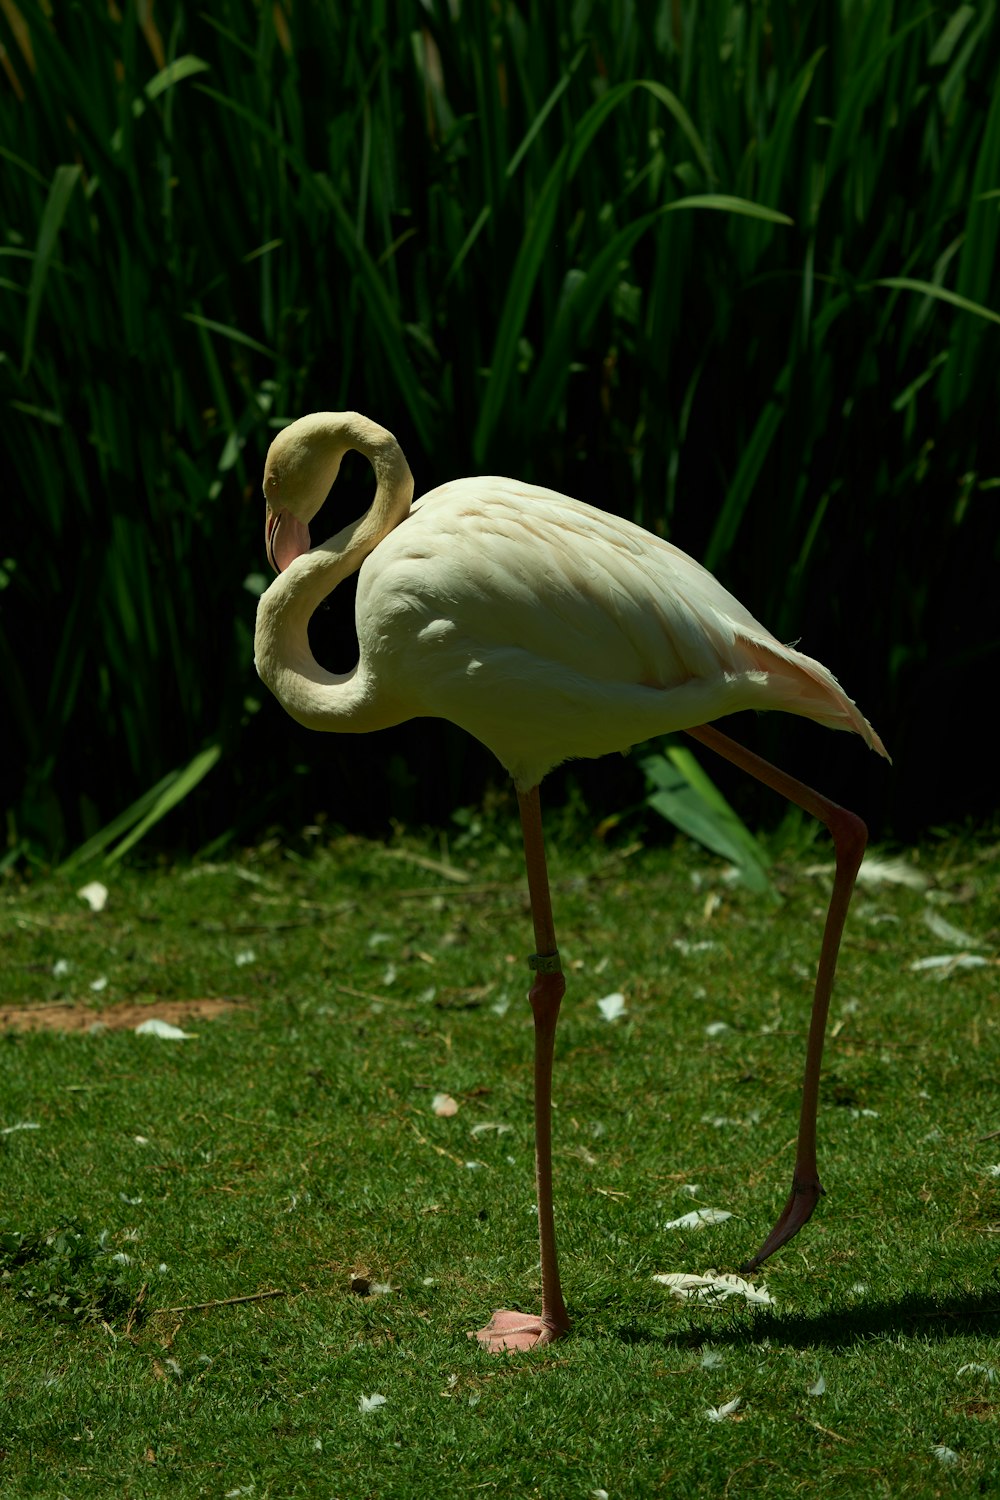 a pink flamingo standing on a lush green field